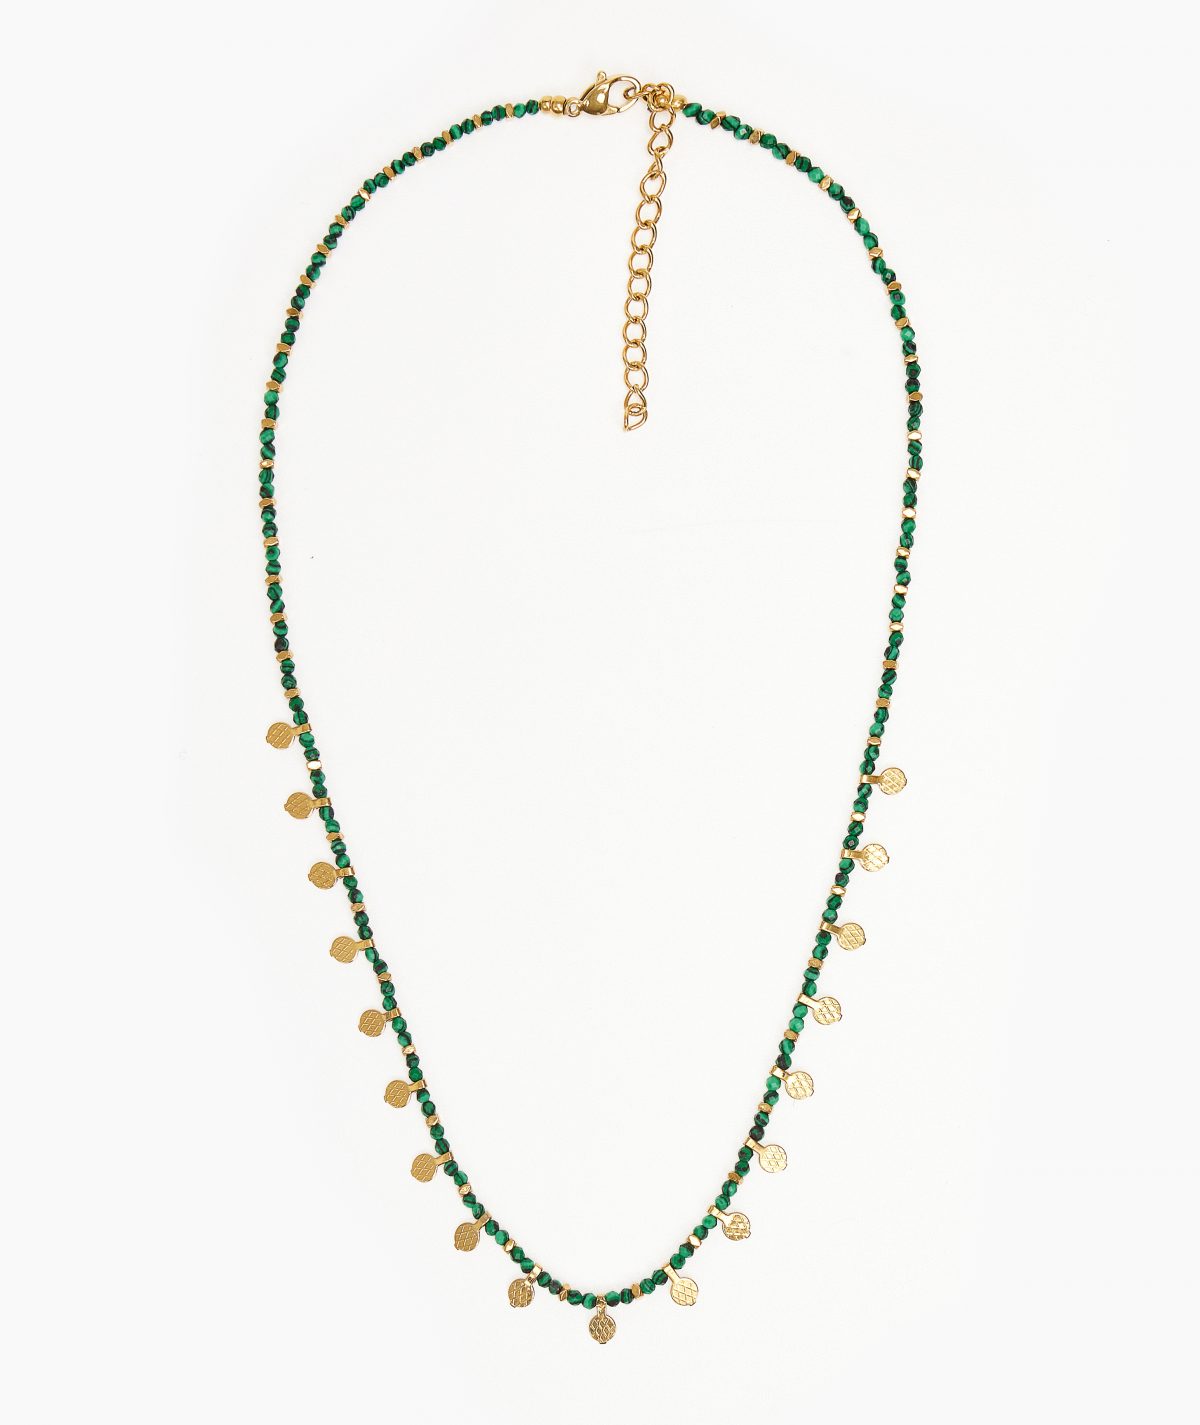 Green Necklace with Gold Coins by TFD